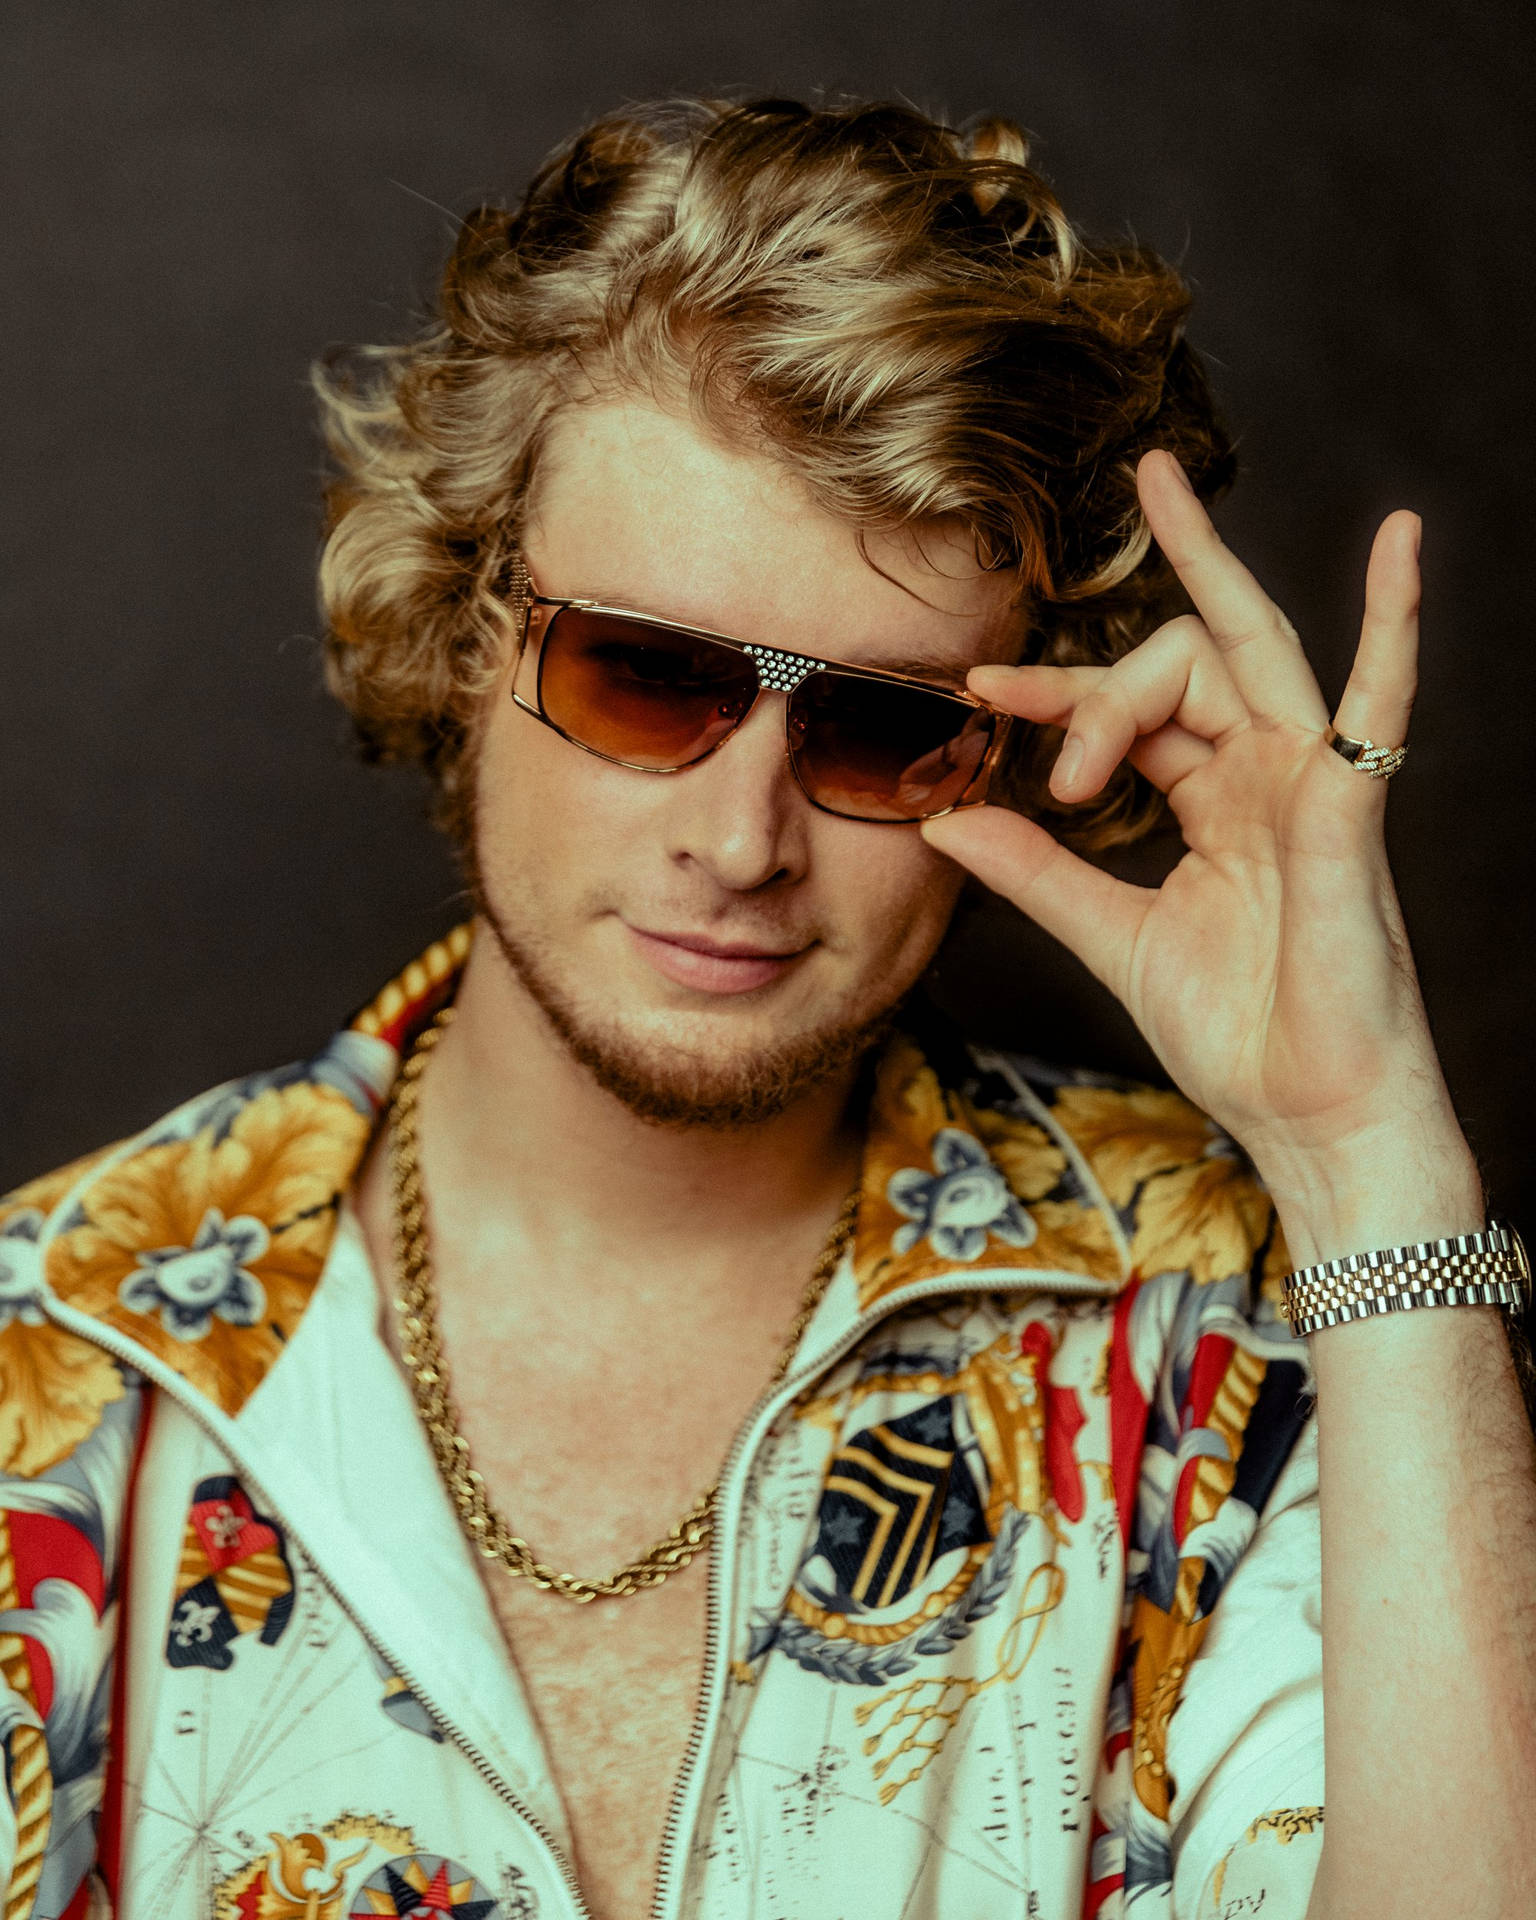 A Swag Photo Of Yung Gravy Wallpaper